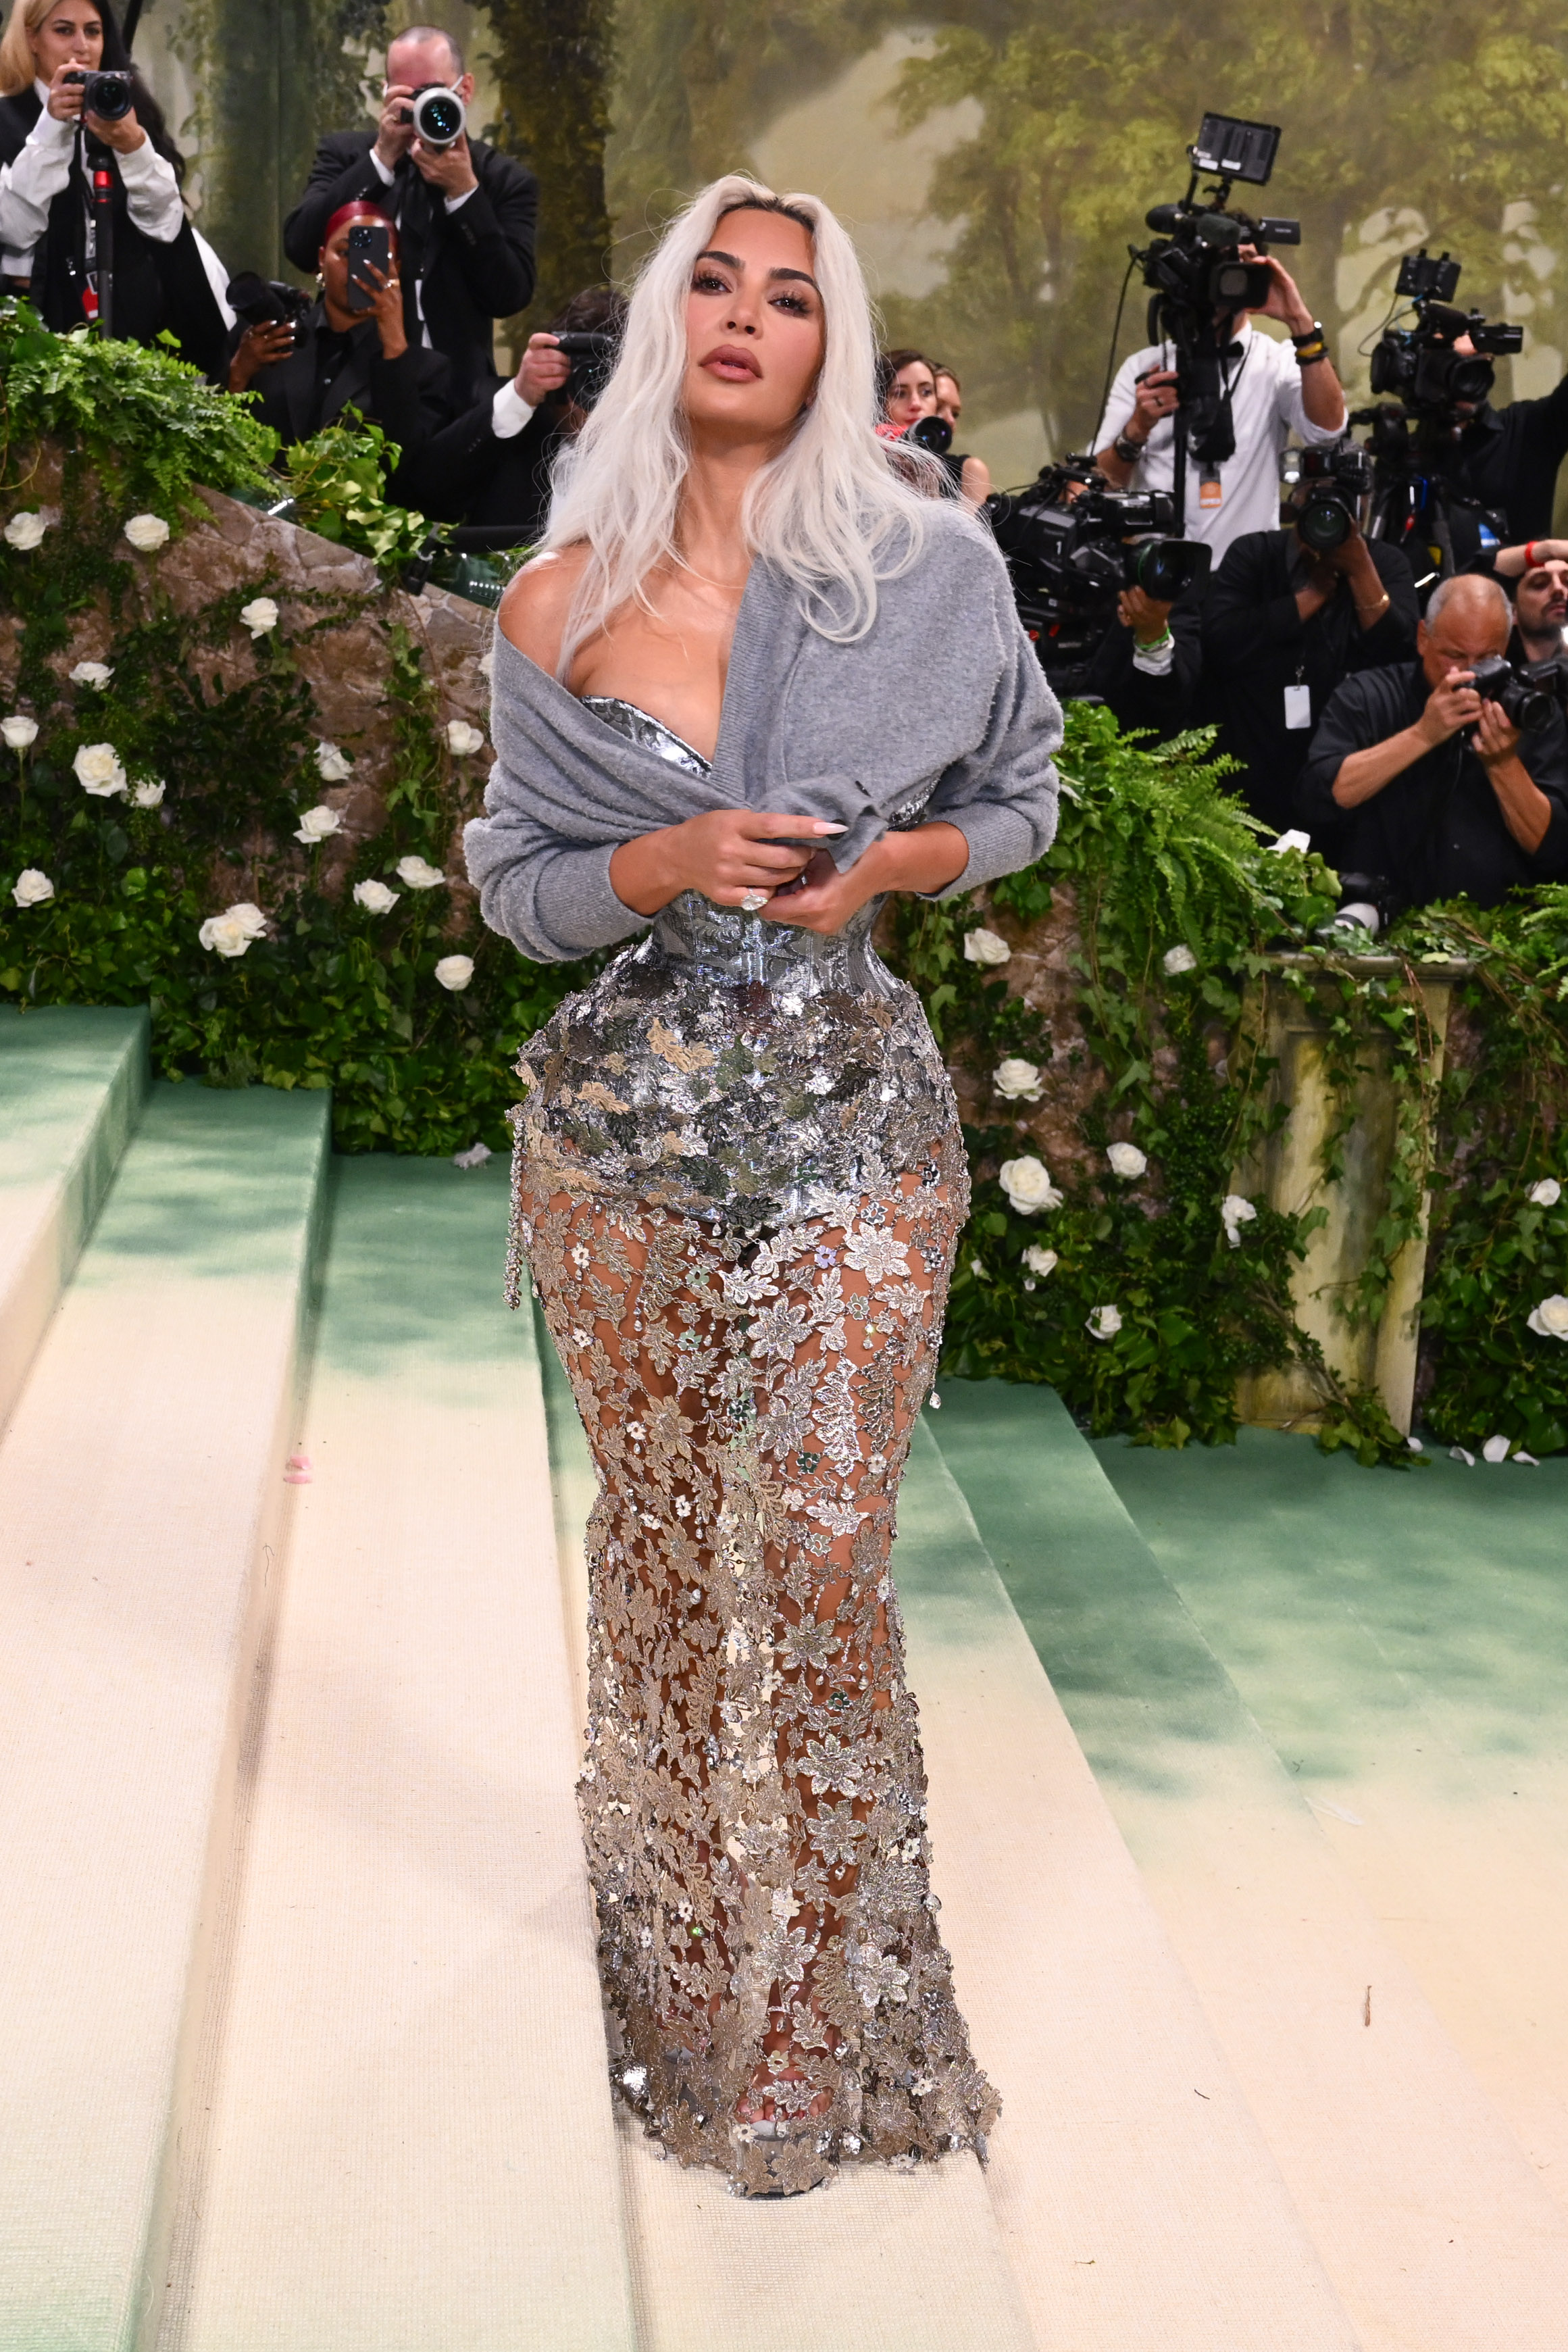 The reality star stuck to the Garden of Time theme in the silver corseted look that cinched her tiny waist to the extreme